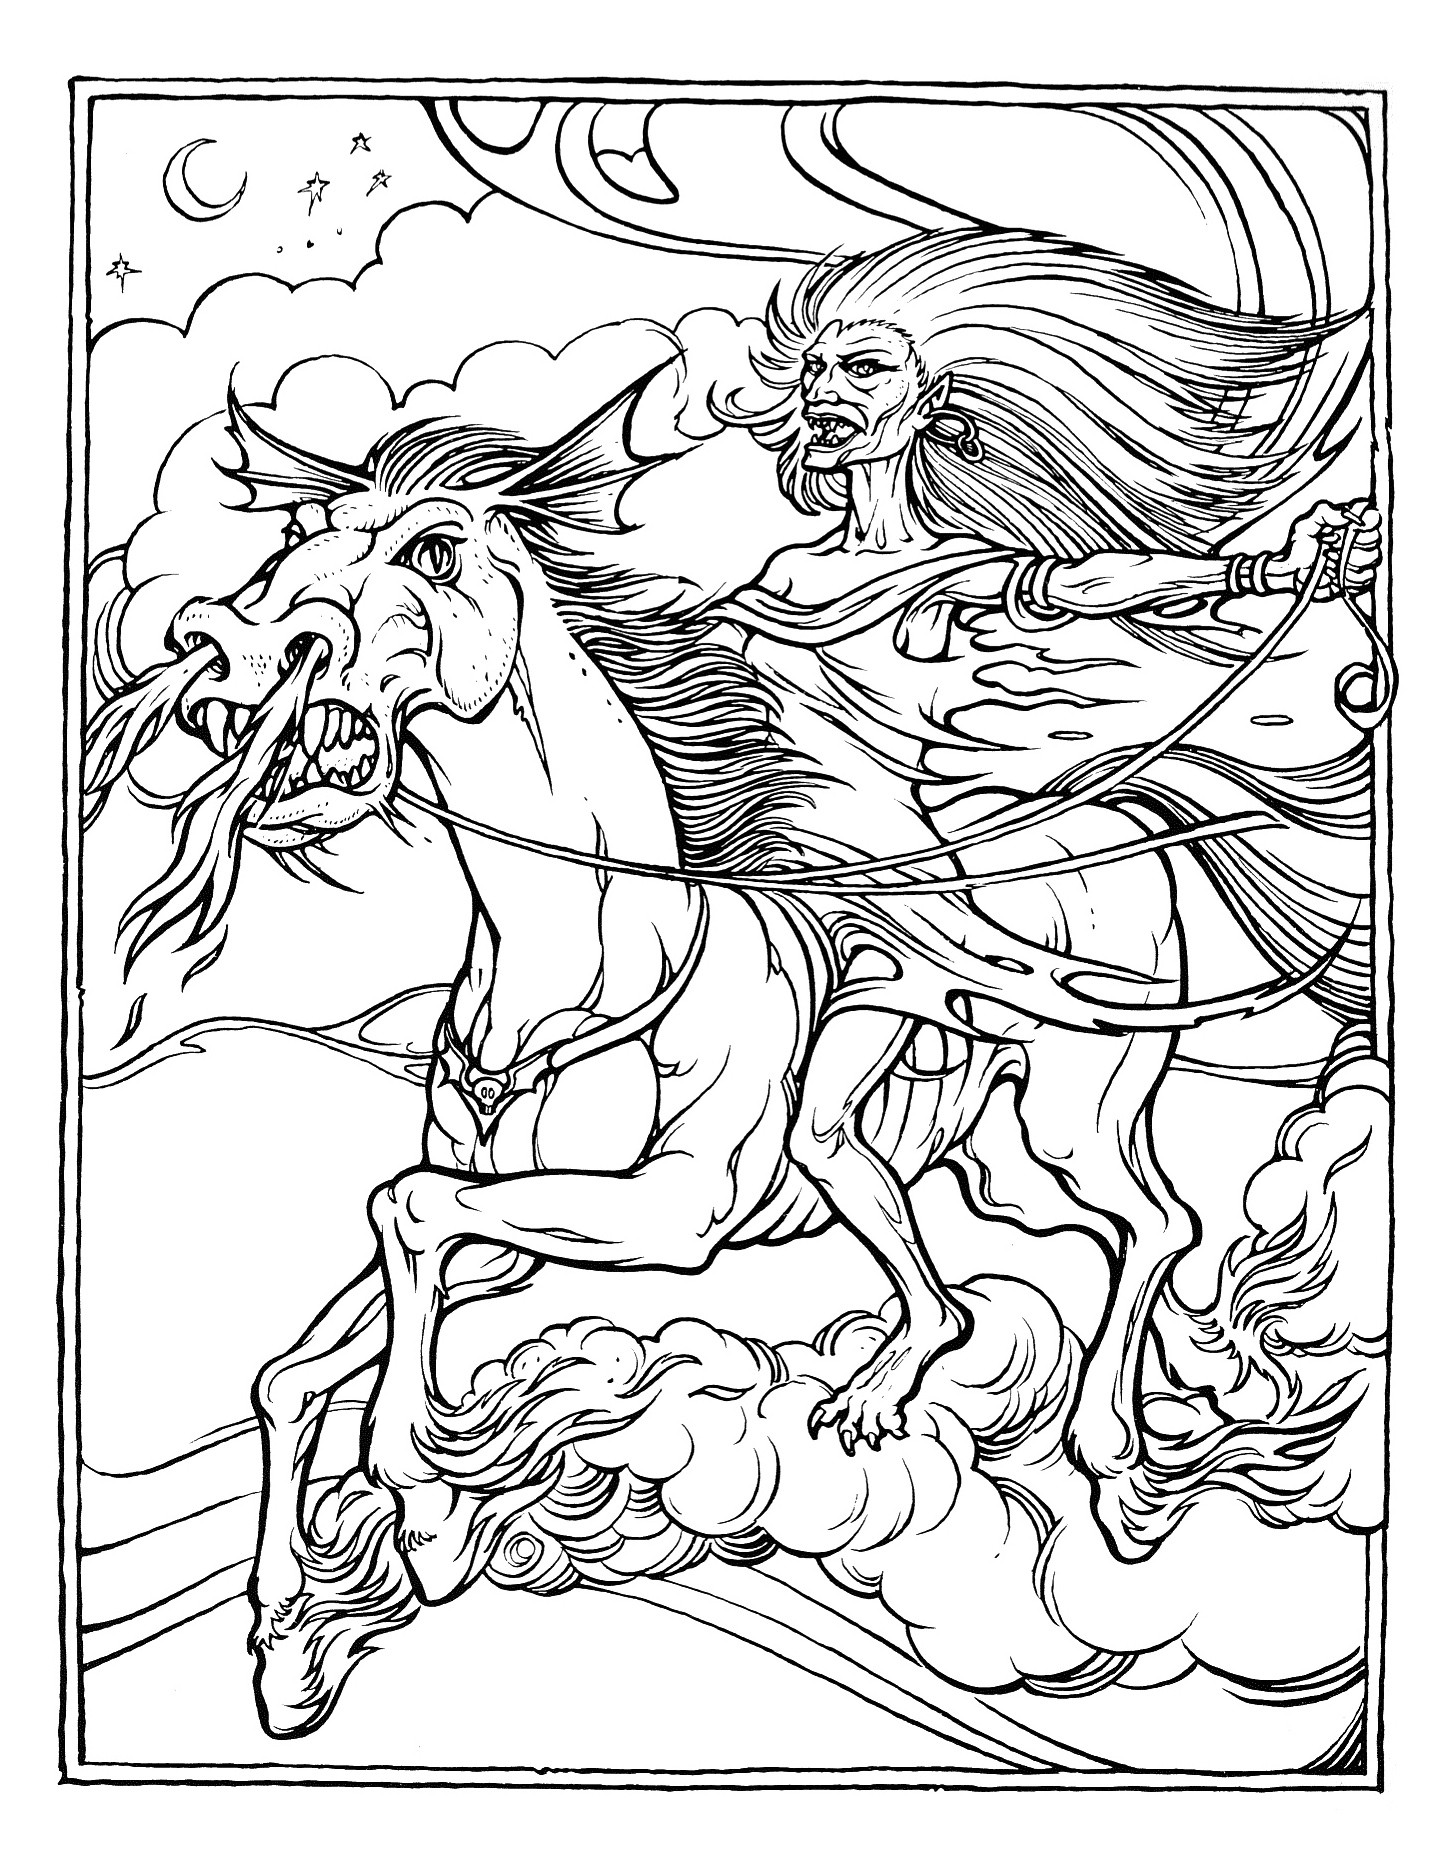 Coloring Sheets For Boys Challening
 Dragon Coloring Pages